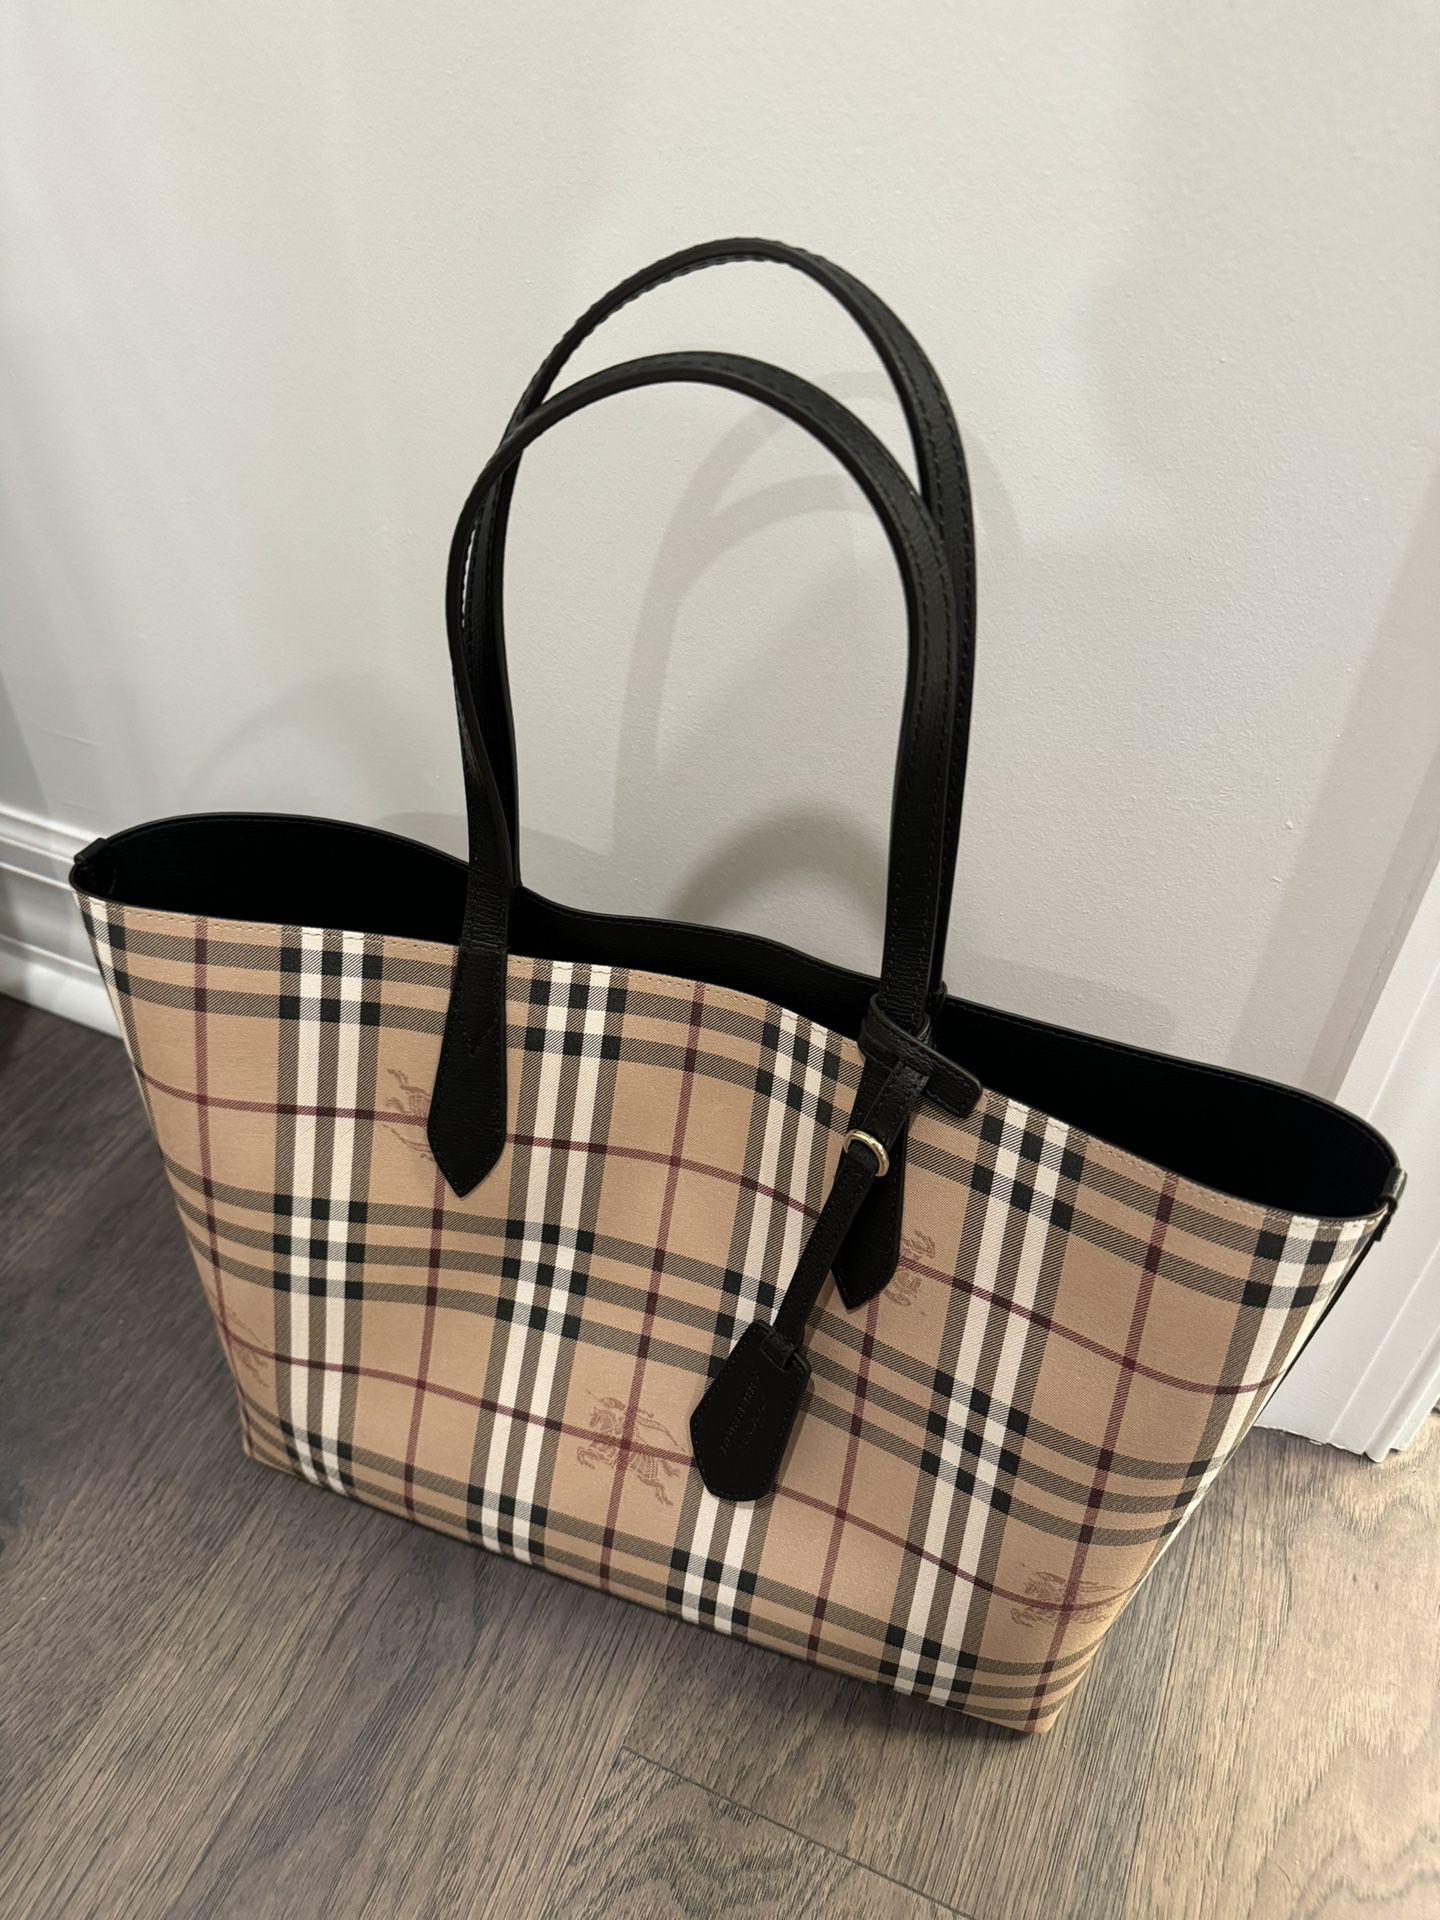 Brand New Burberry Tote Inside Out Bag With Tags On